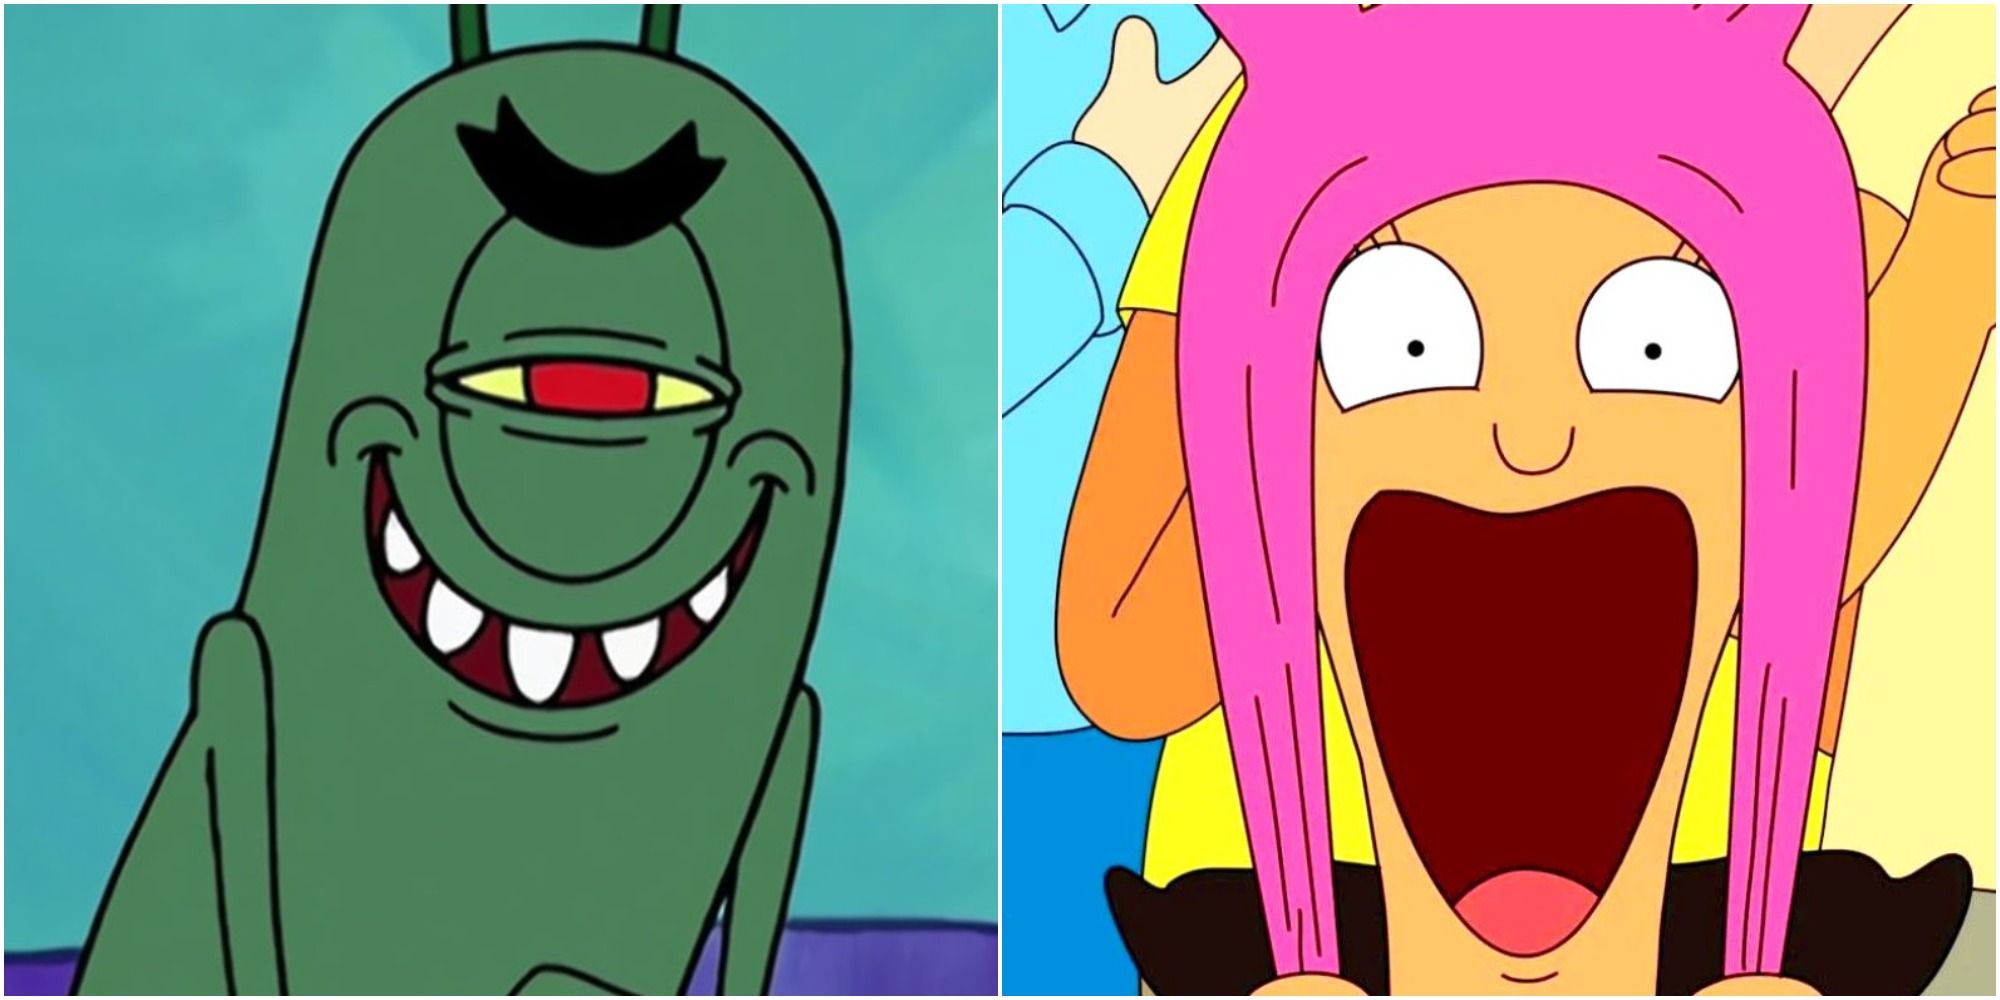 10 Cartoon Characters With Great Potential